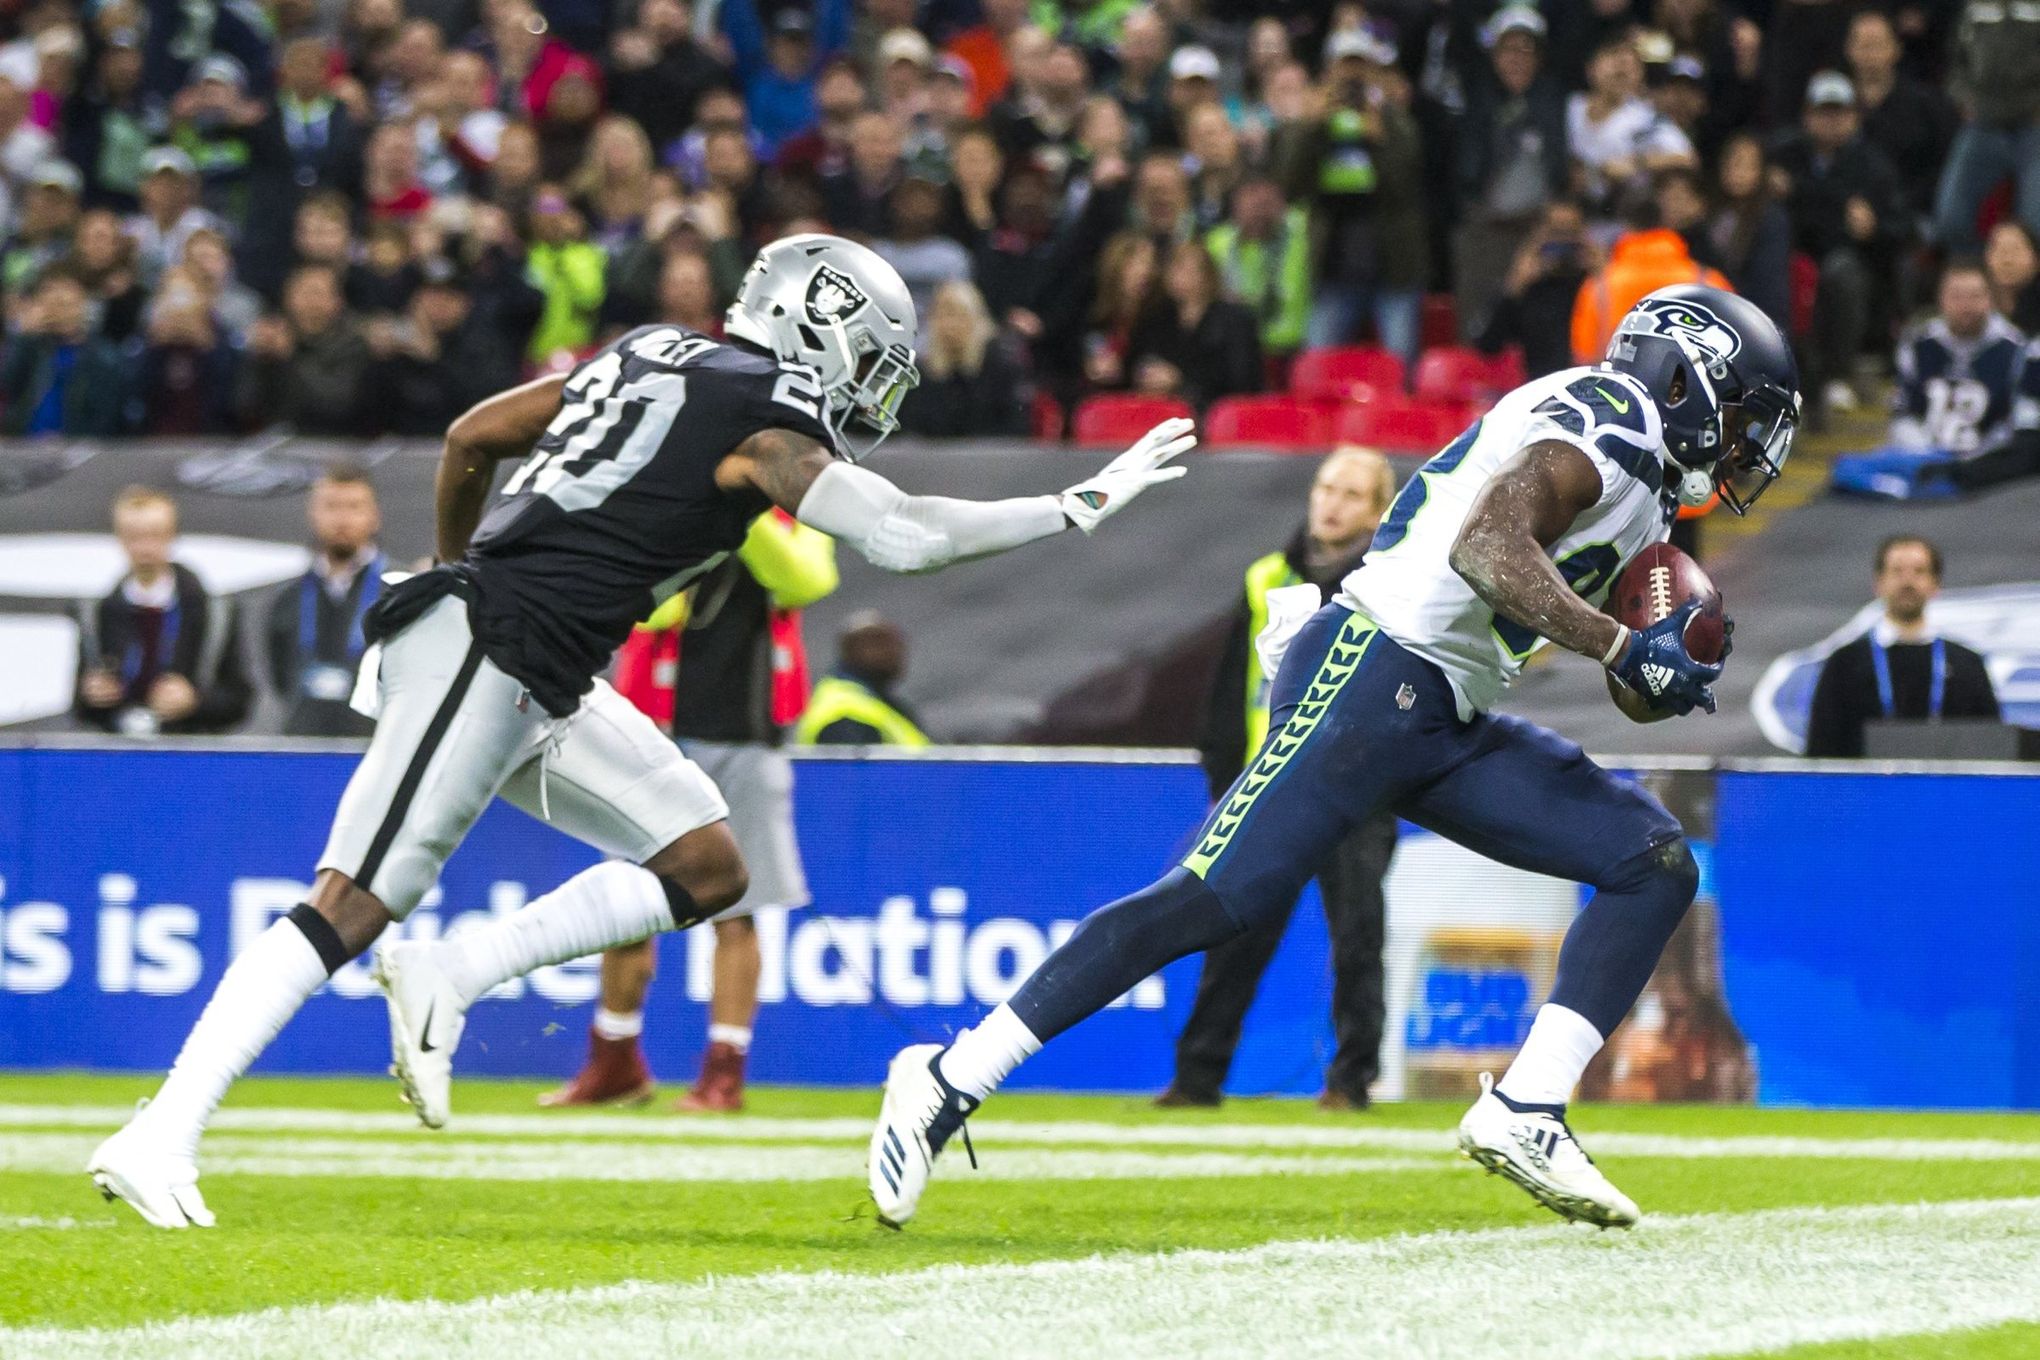 DOUG BALDWIN Seahawks wide receiver scores a TD against the